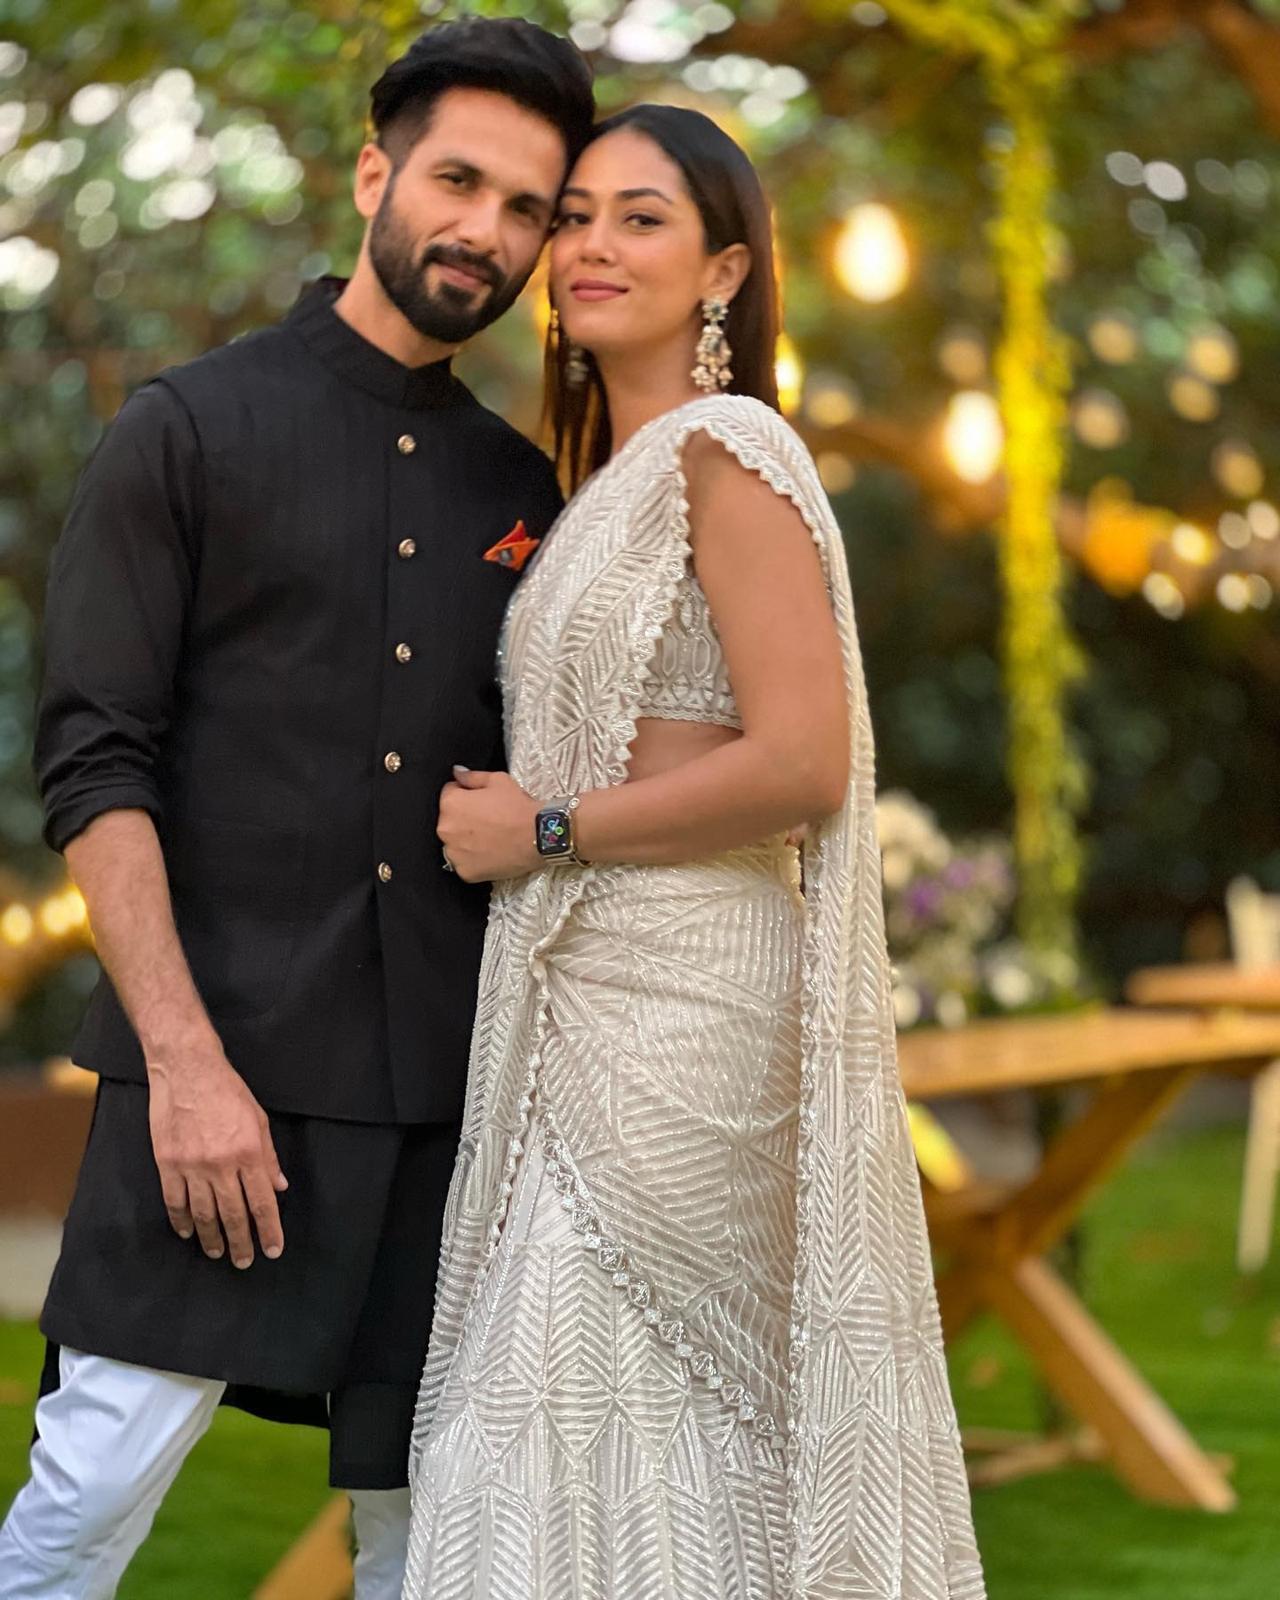 Meanwhile, Shahid Kapoor's wife Mira Rajput also shared a glimpse from the wedding ceremony. While Shahid wore a black indo-western with white churidar, Mira was a vision to behold in a textured white saree.